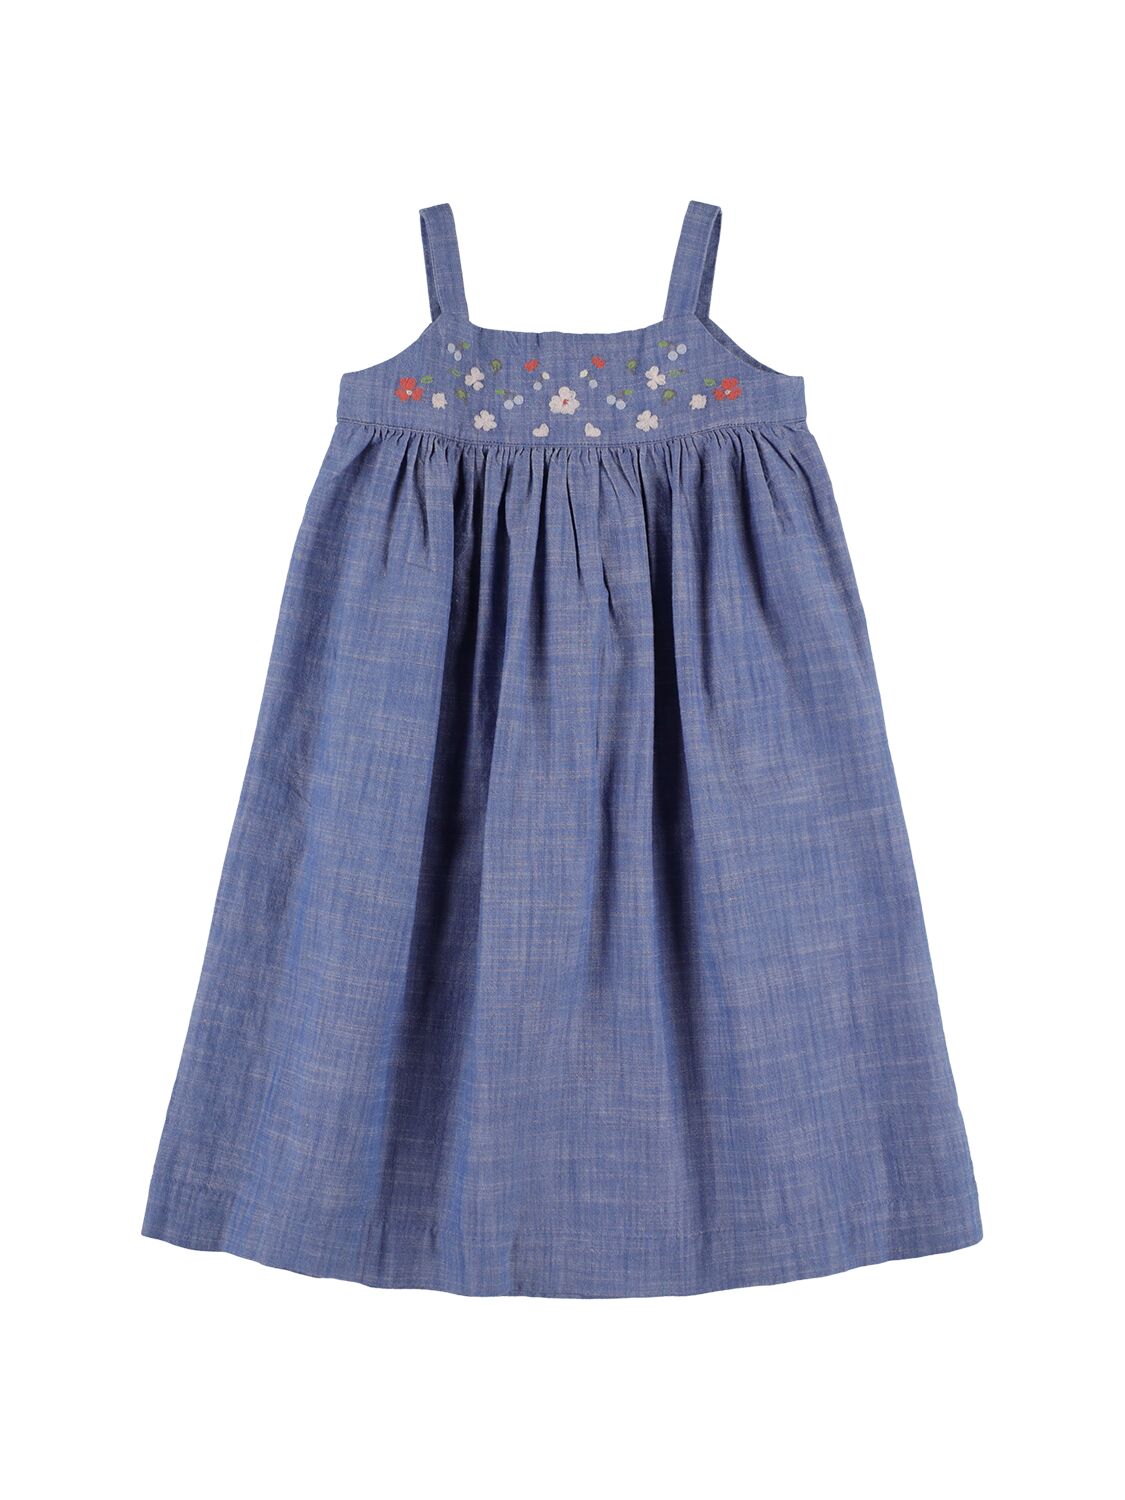 Bonpoint Kids' Cotton Chambray Dress W/embroideries In Blue